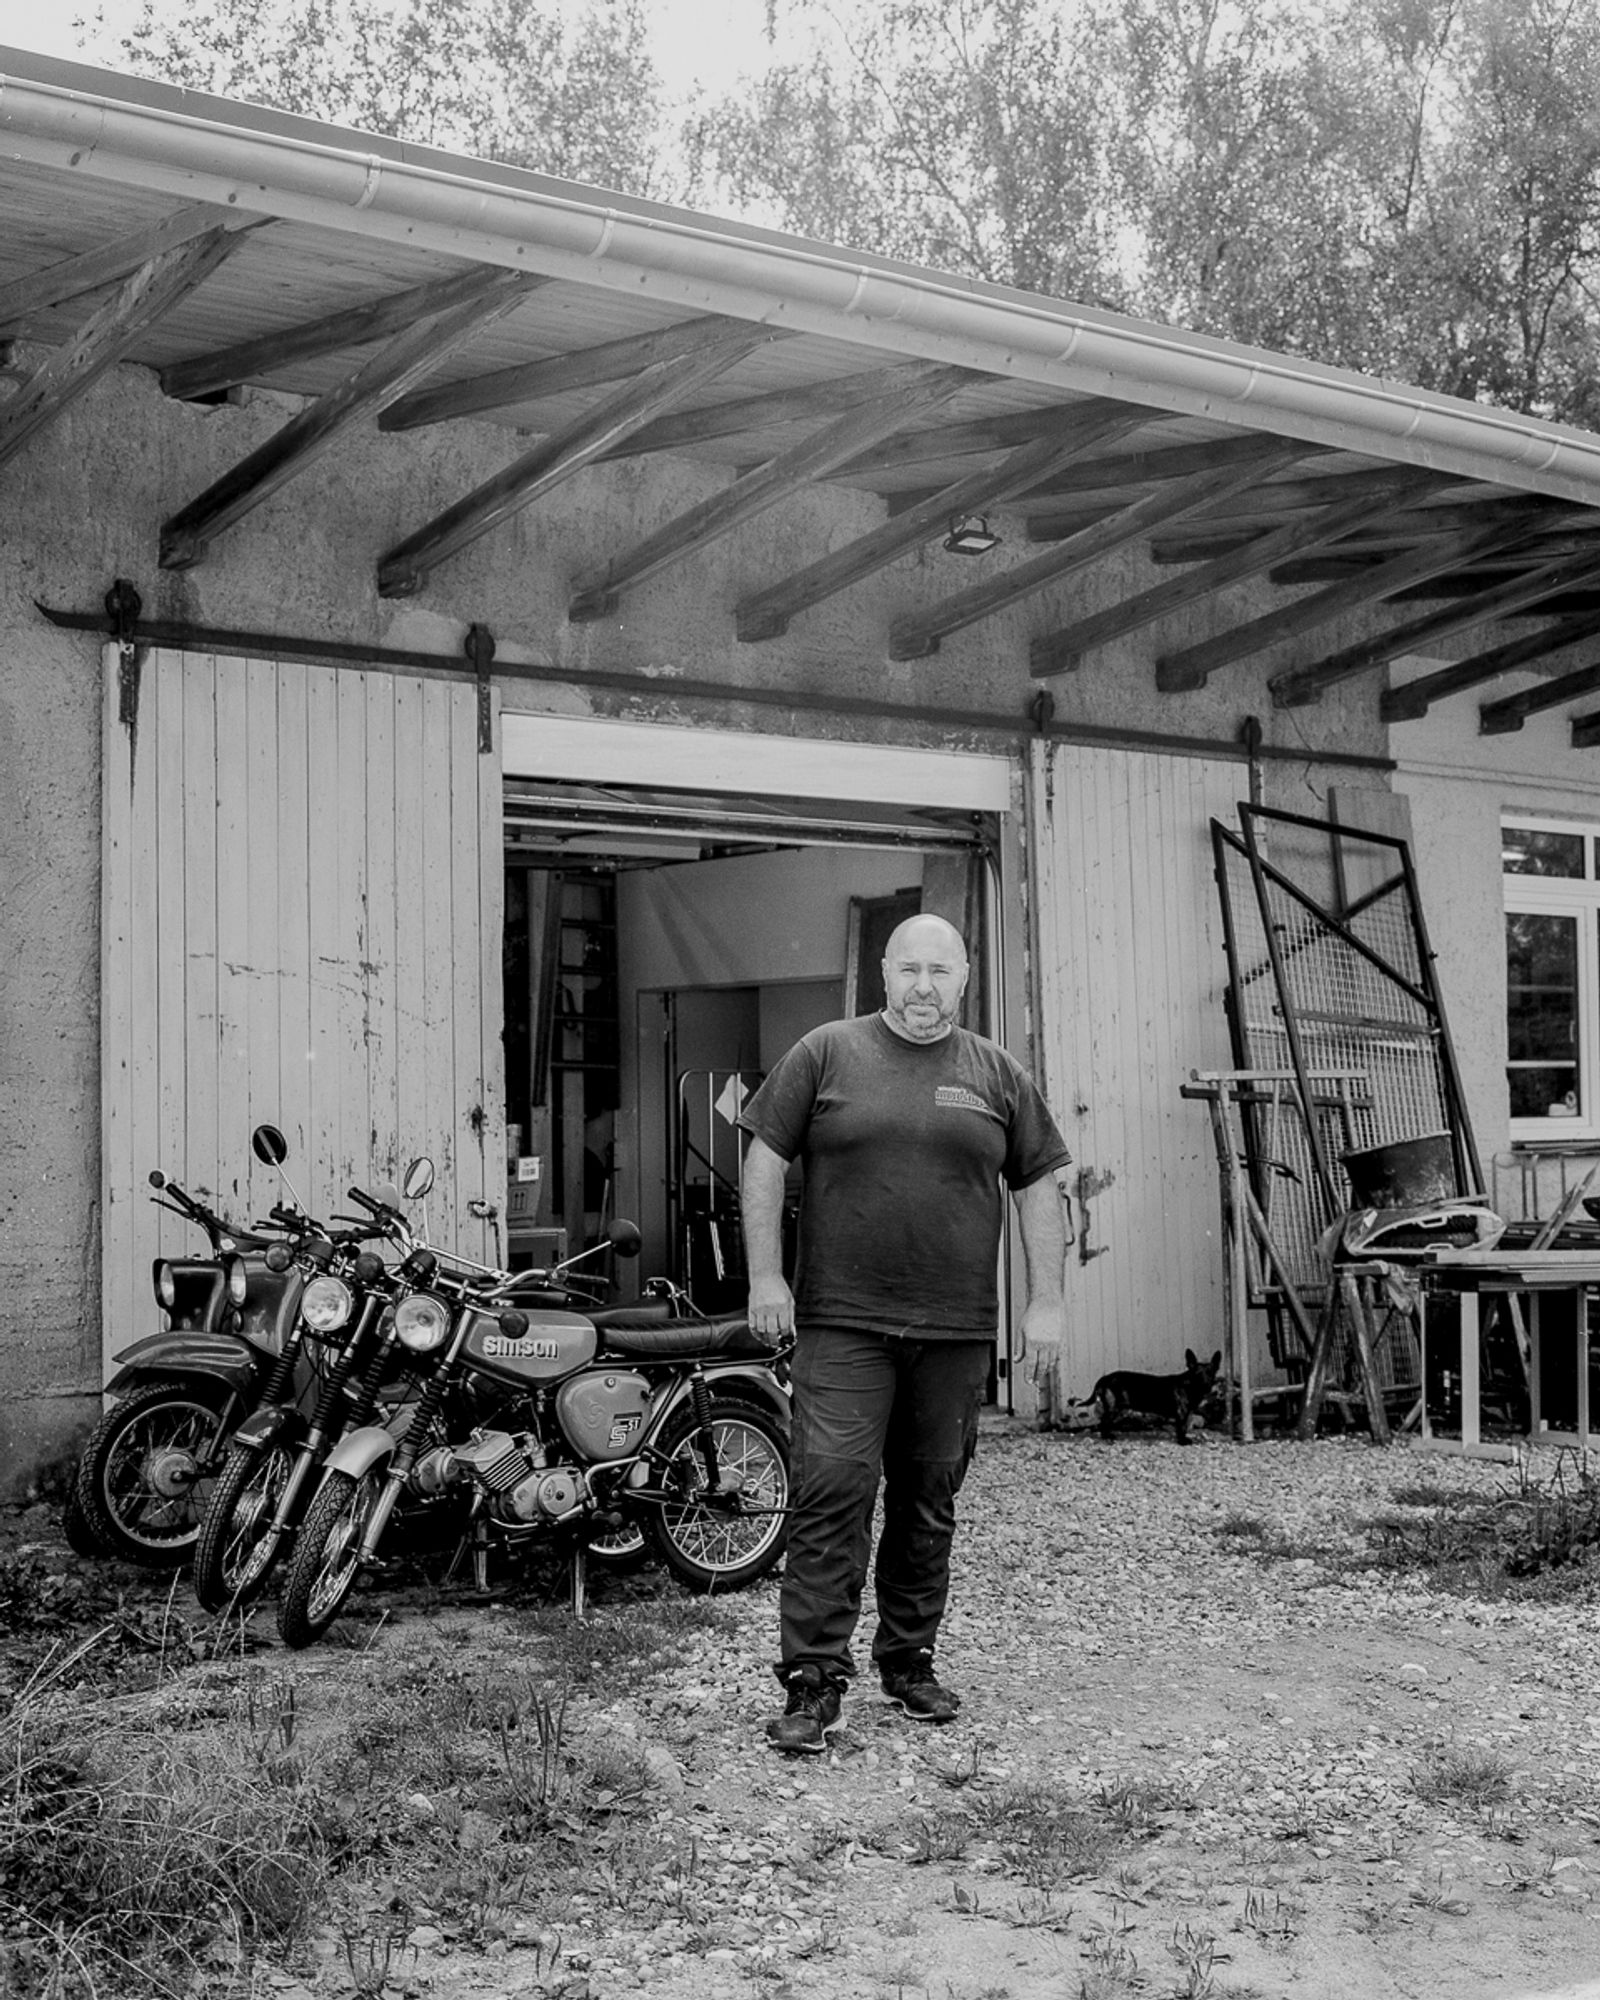 © Paweł Starzec - Thomas, owner of a motorcycle and moped workshop located next to former internal border.